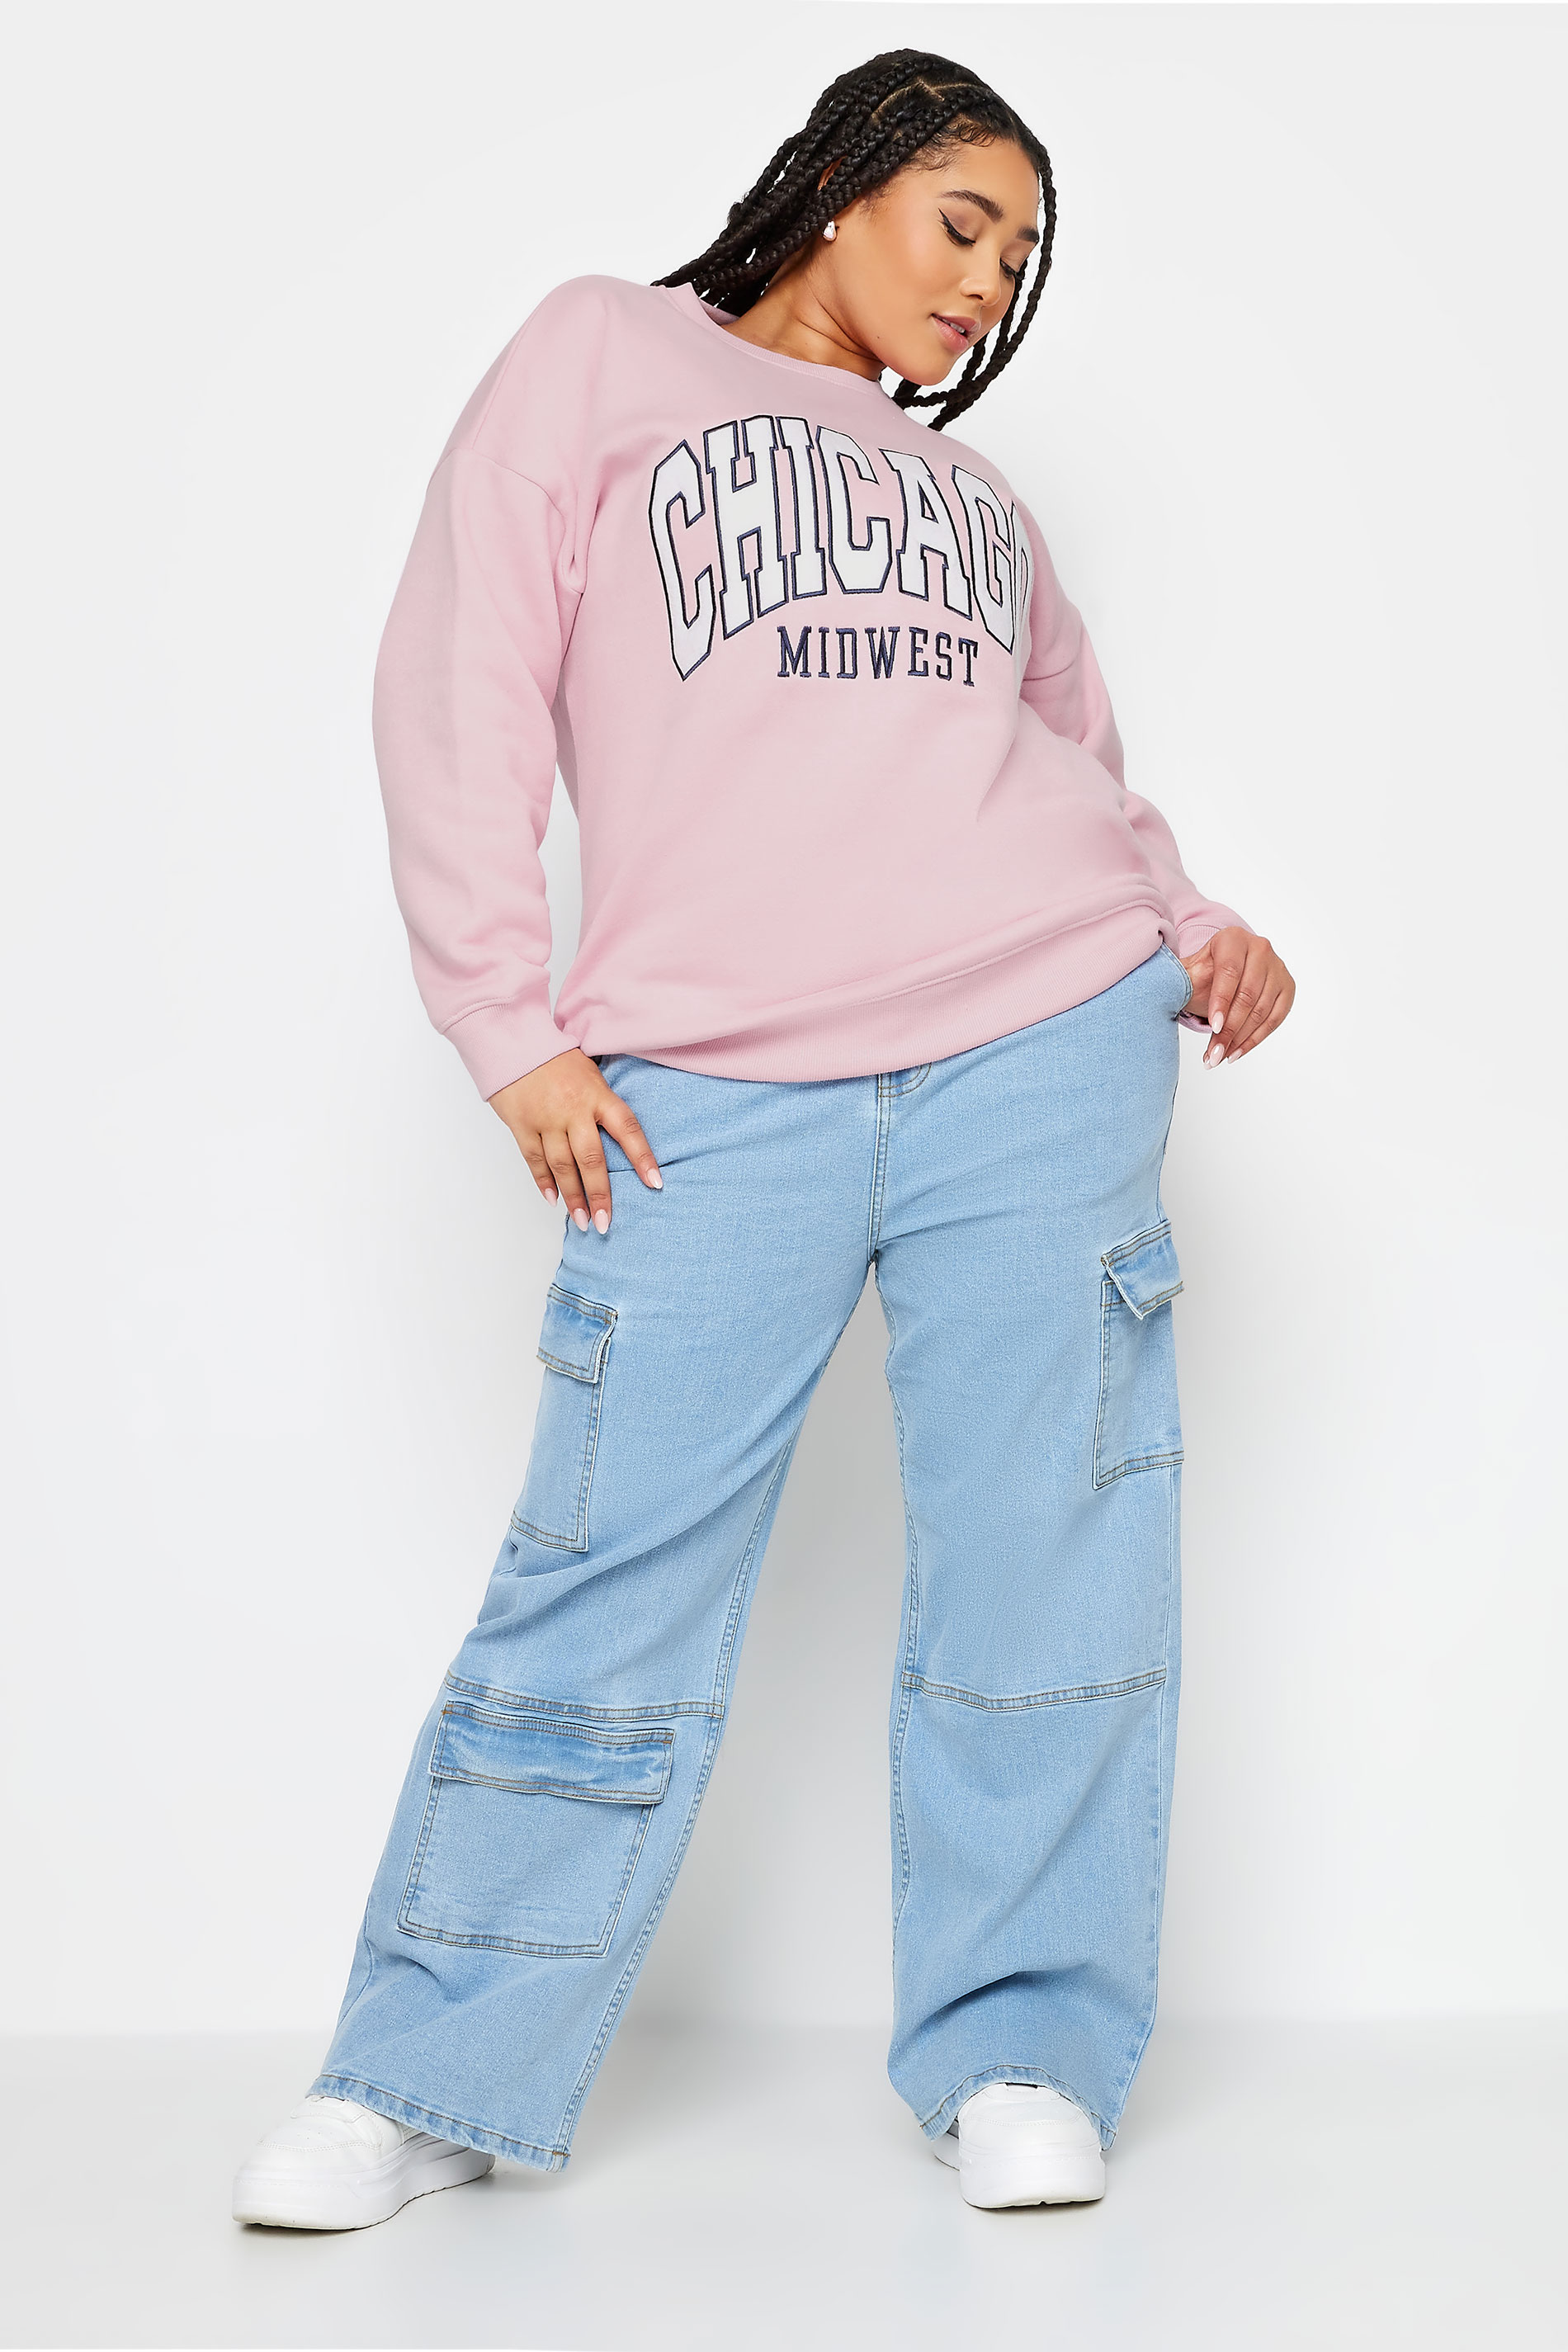 YOURS Plus Size Pink 'Chicago' Crew Neck Sweatshirt | Yours Clothing 3